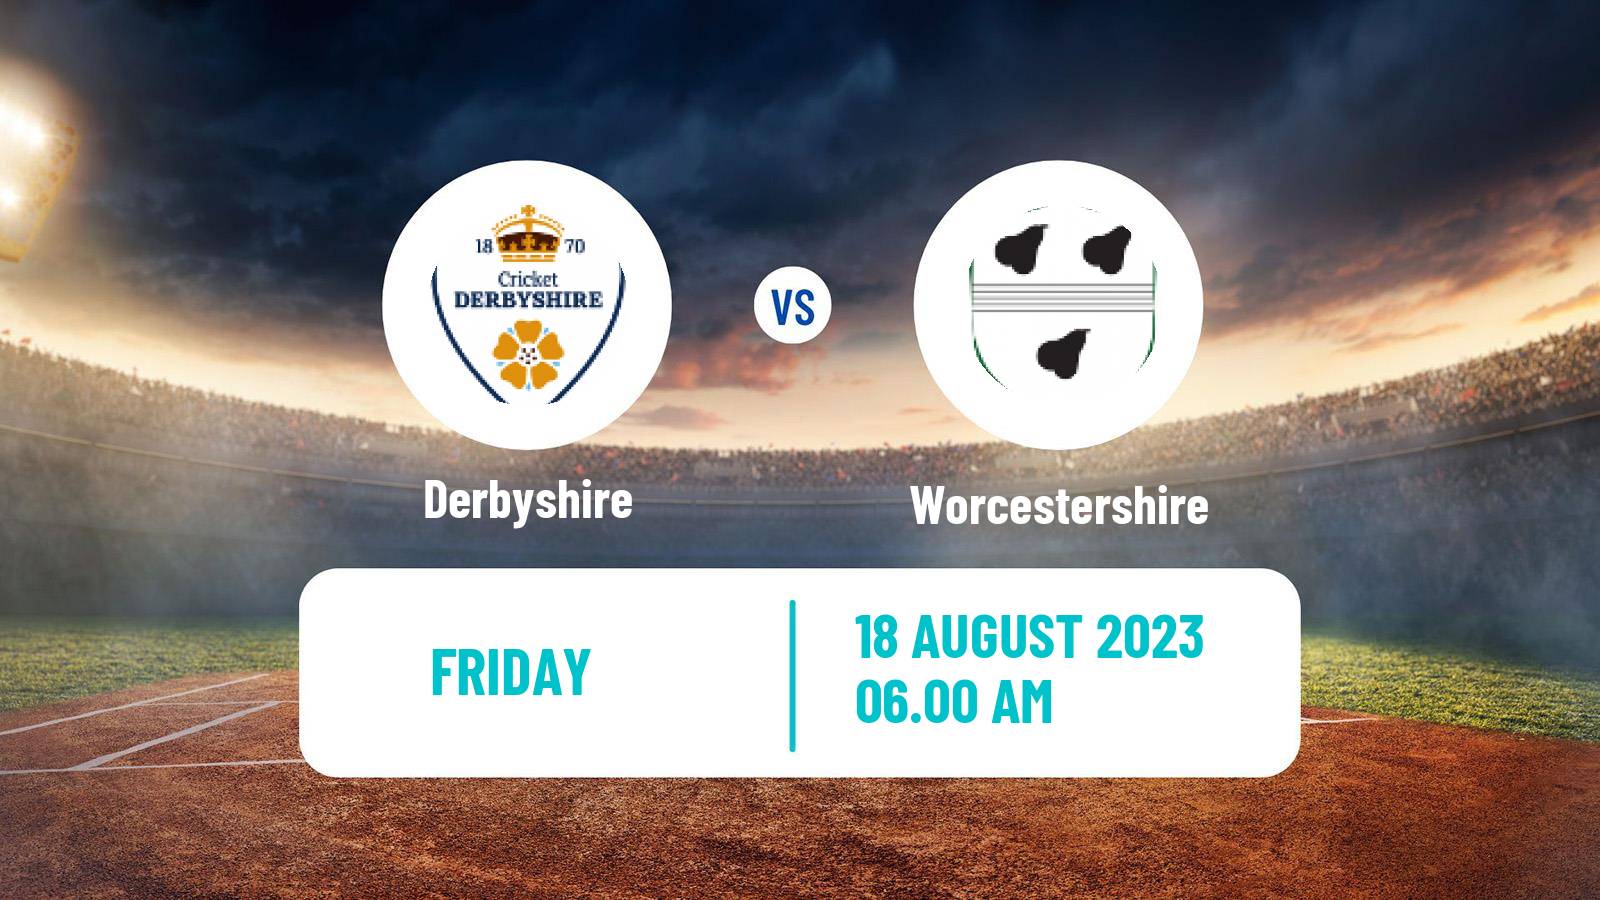 Cricket Royal London One-Day Cup Derbyshire - Worcestershire